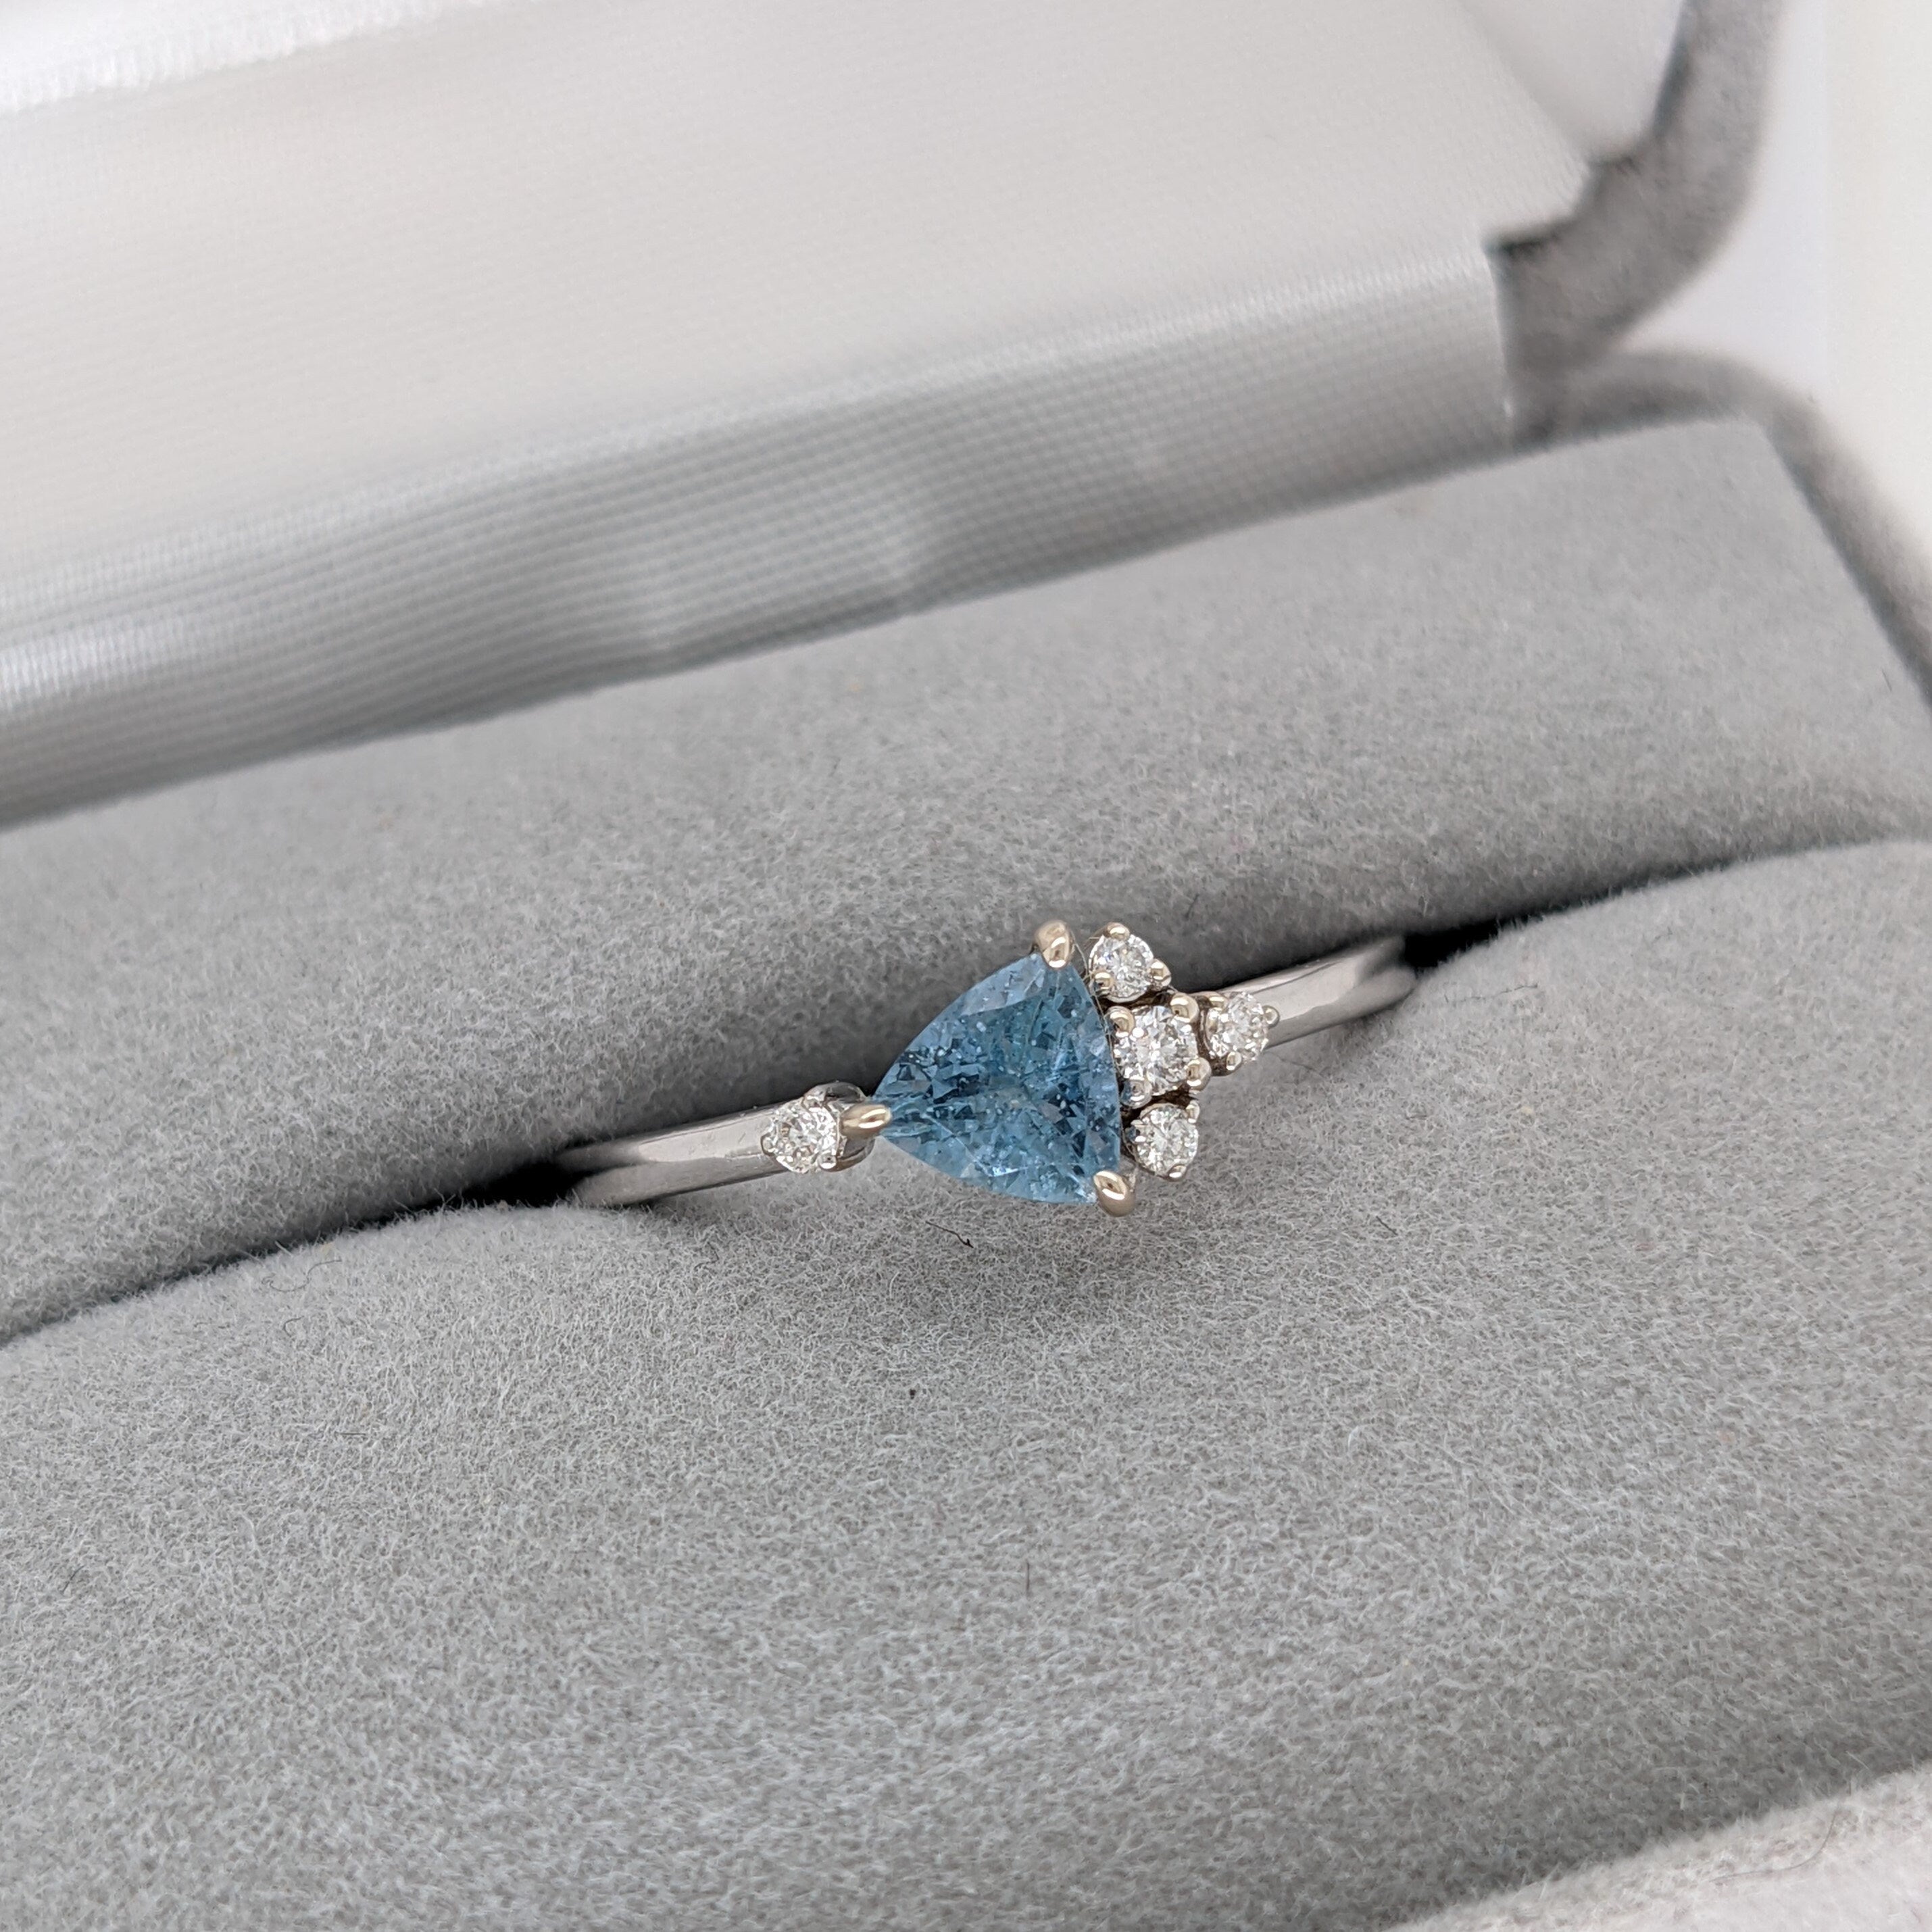 Gorgeous Trillion Aquamarine Ring in White Gold with Diamond Accents | Statement Ring | Natural and Sustainable | March Birthstone